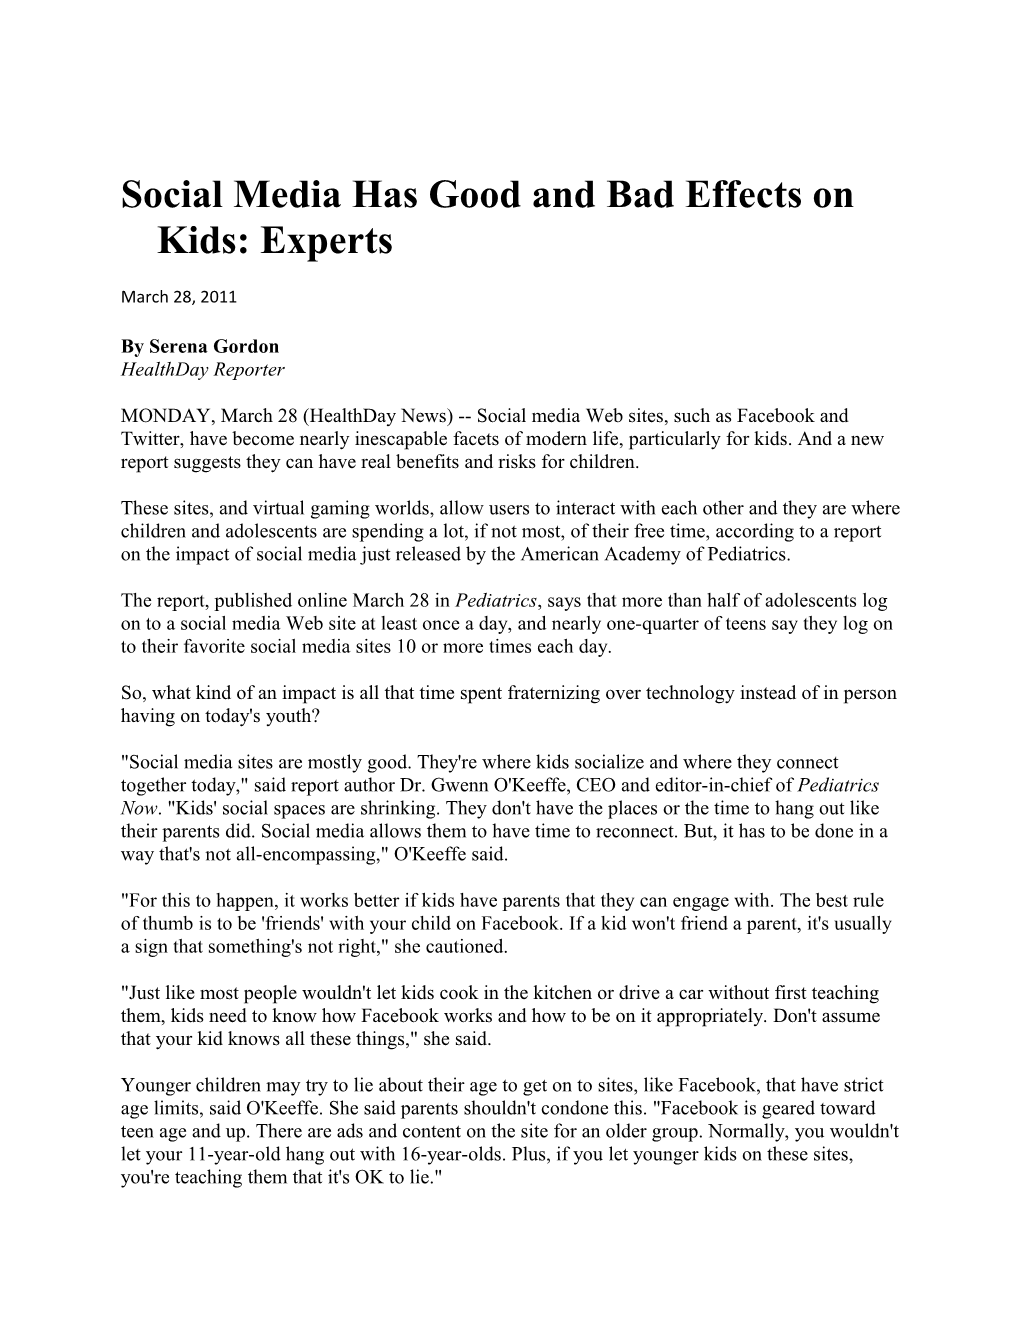 Social Media Has Good and Bad Effects on Kids: Experts